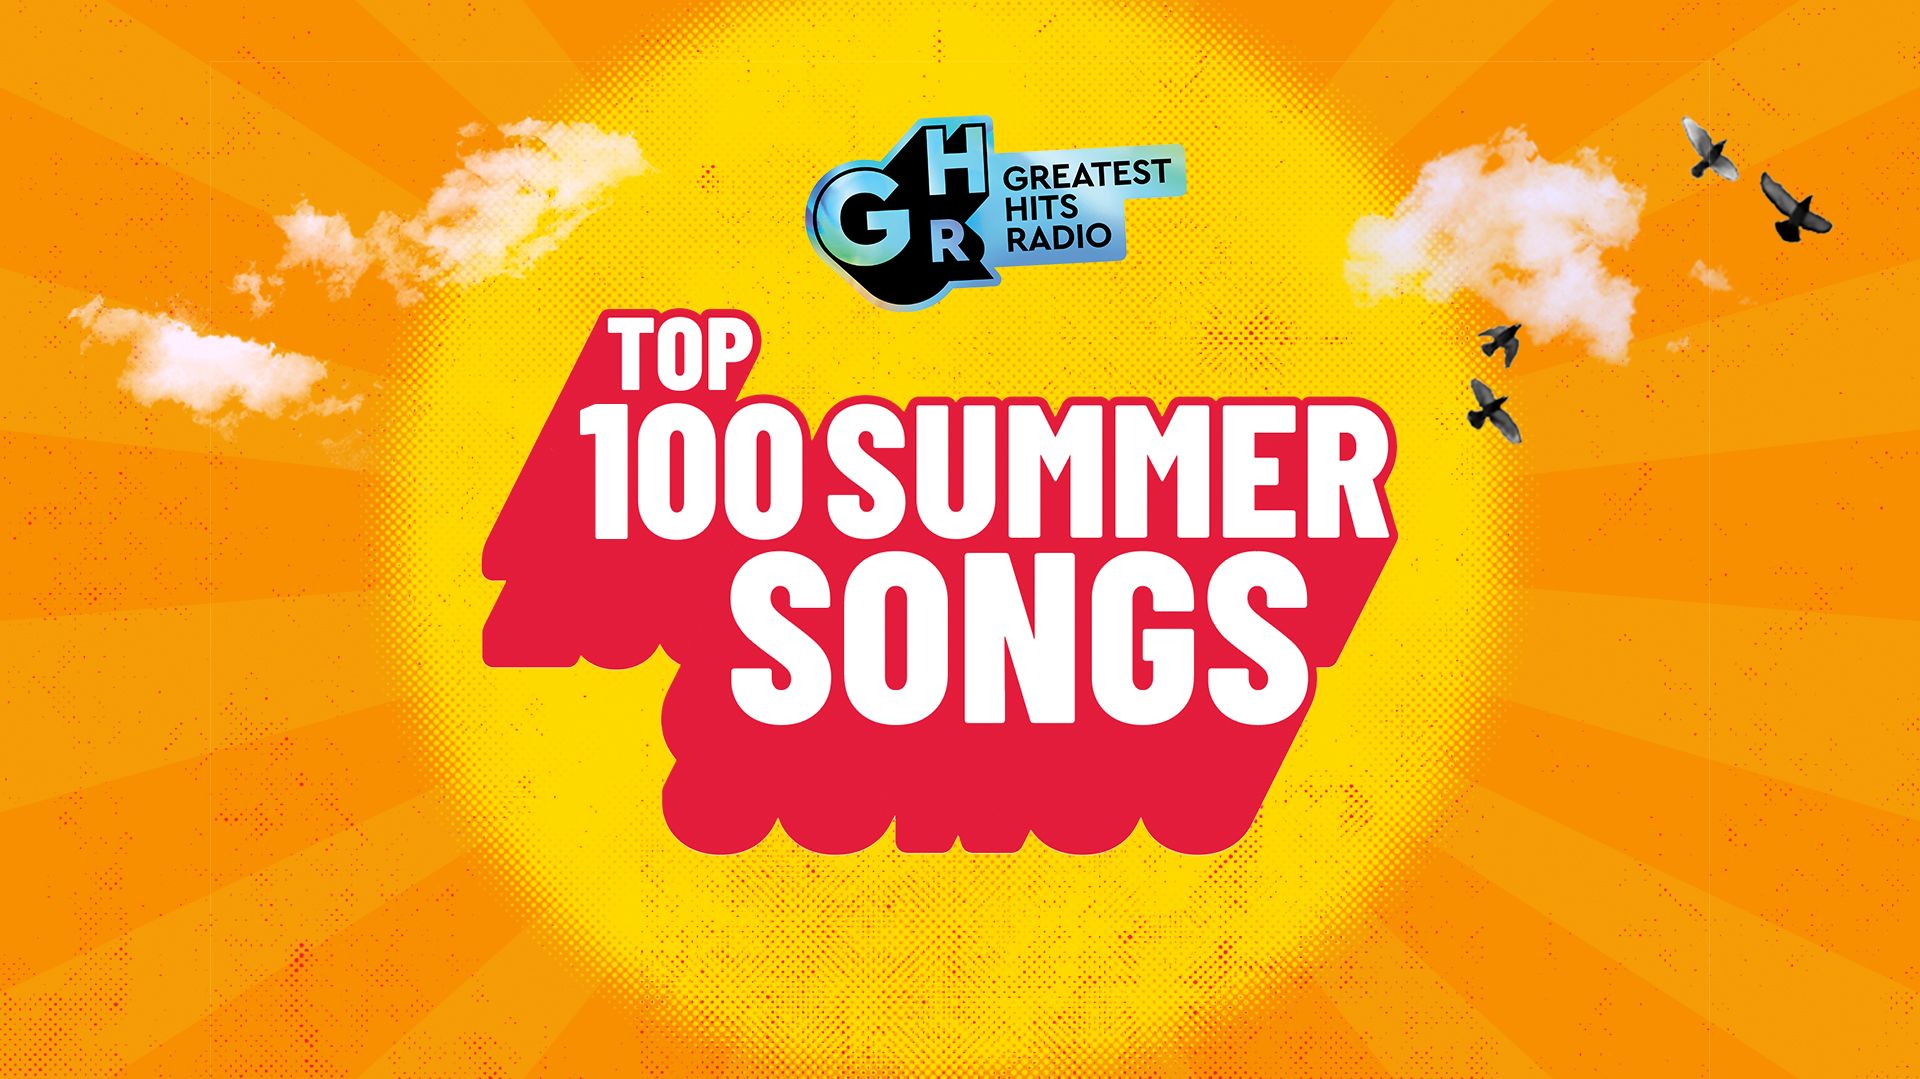 Greatest Hits Radio's Top 100 Summer Songs On Air Greatest Hits Radio